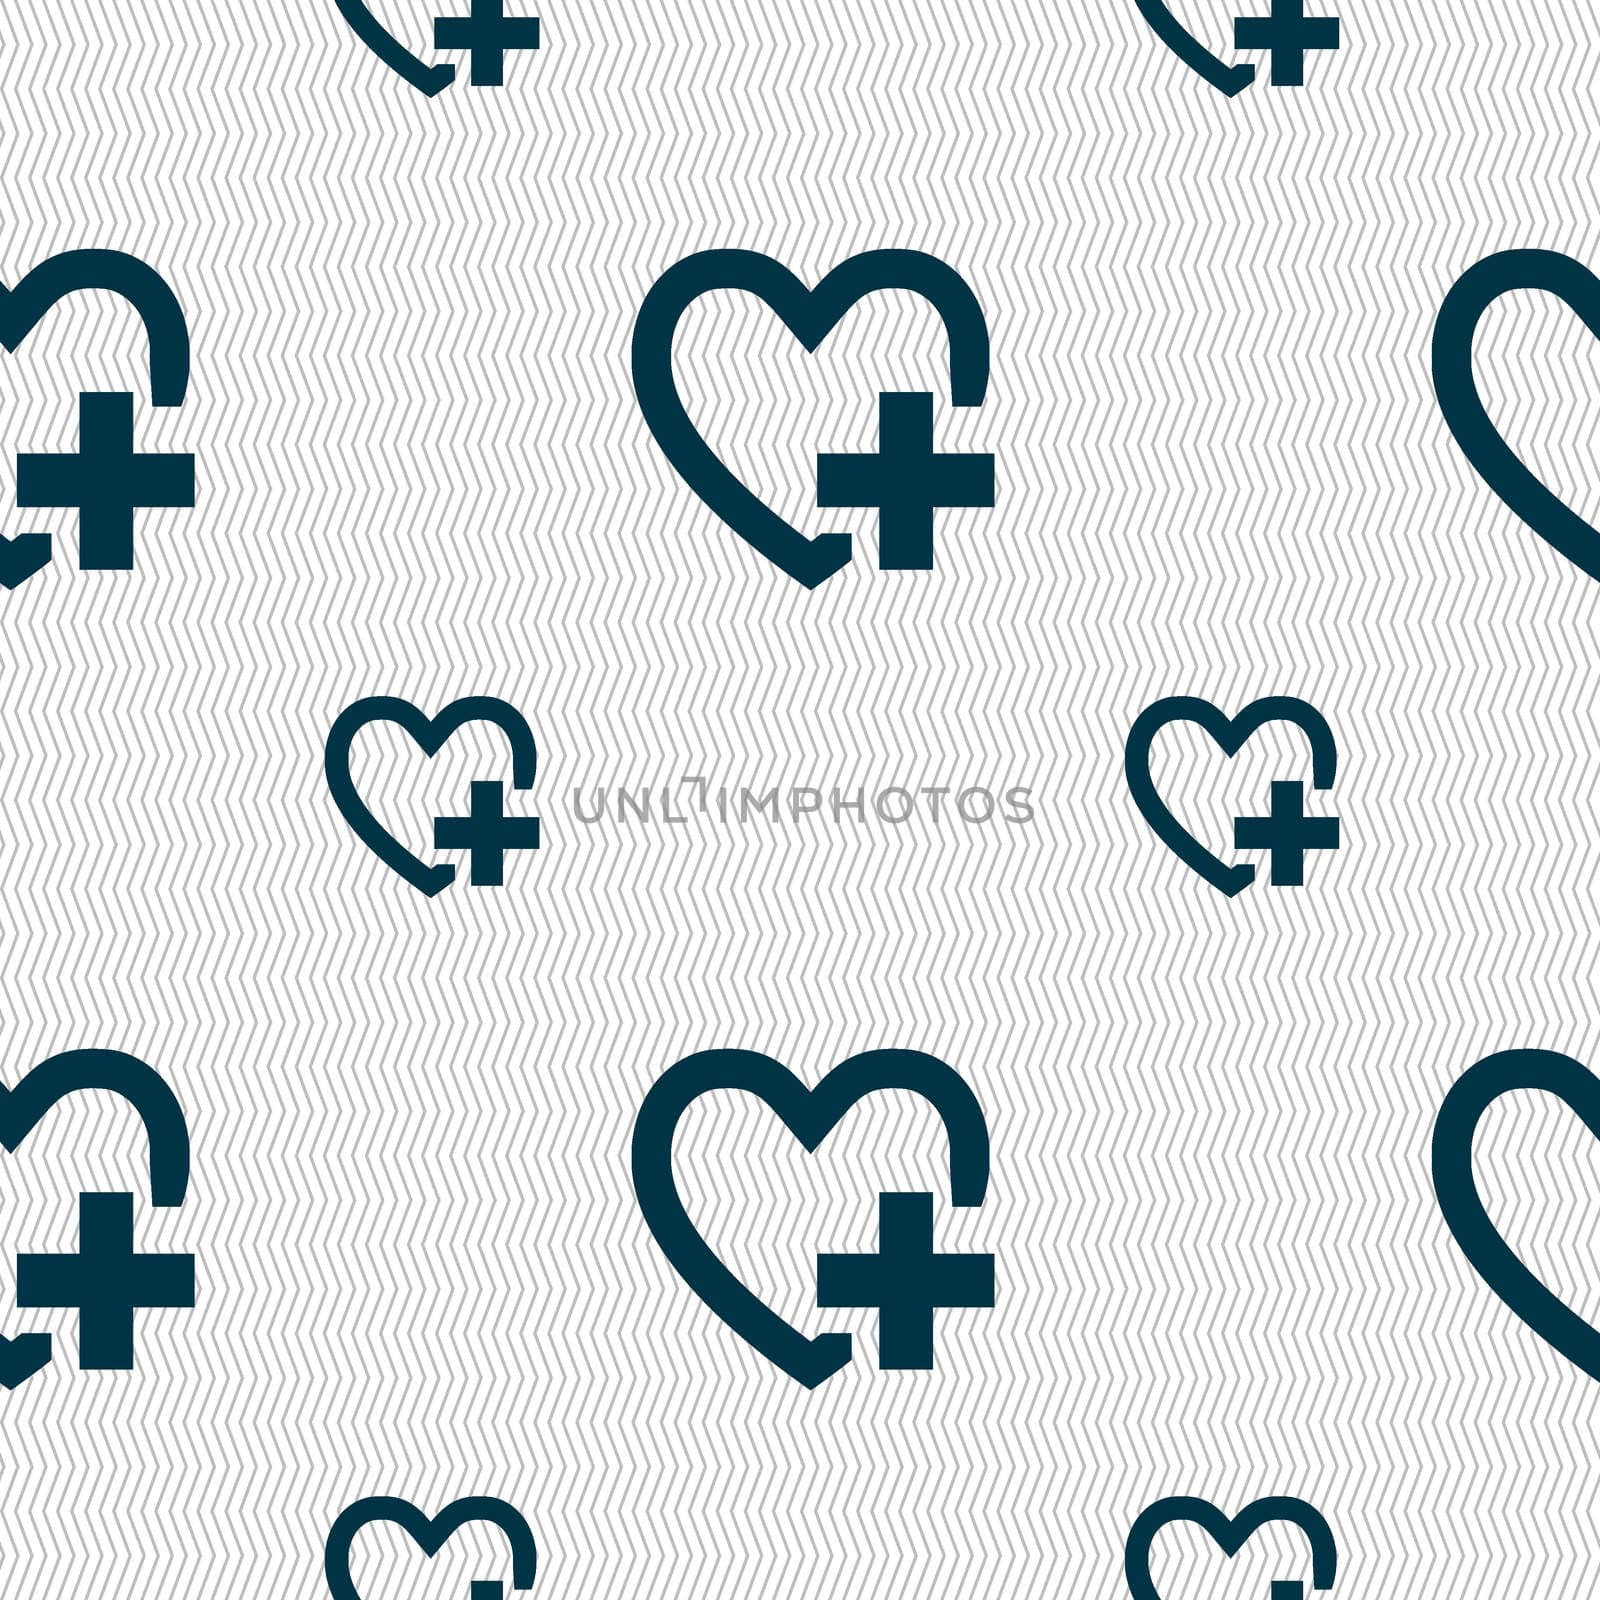 Heart sign icon. Love symbol. Seamless pattern with geometric texture. illustration